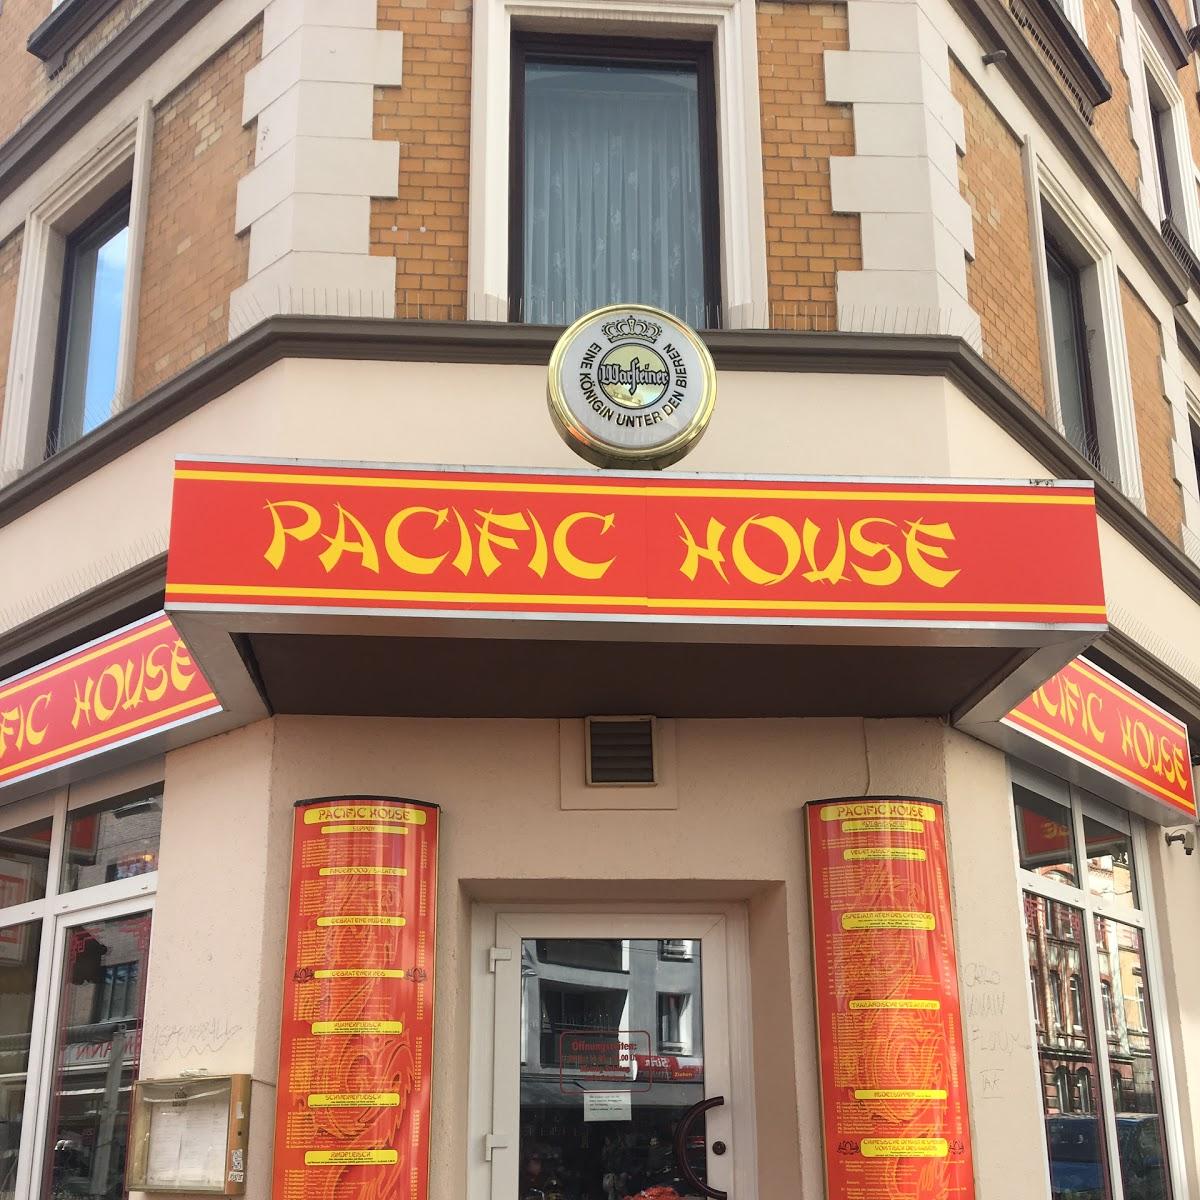 Restaurant "Pacific House" in Hannover